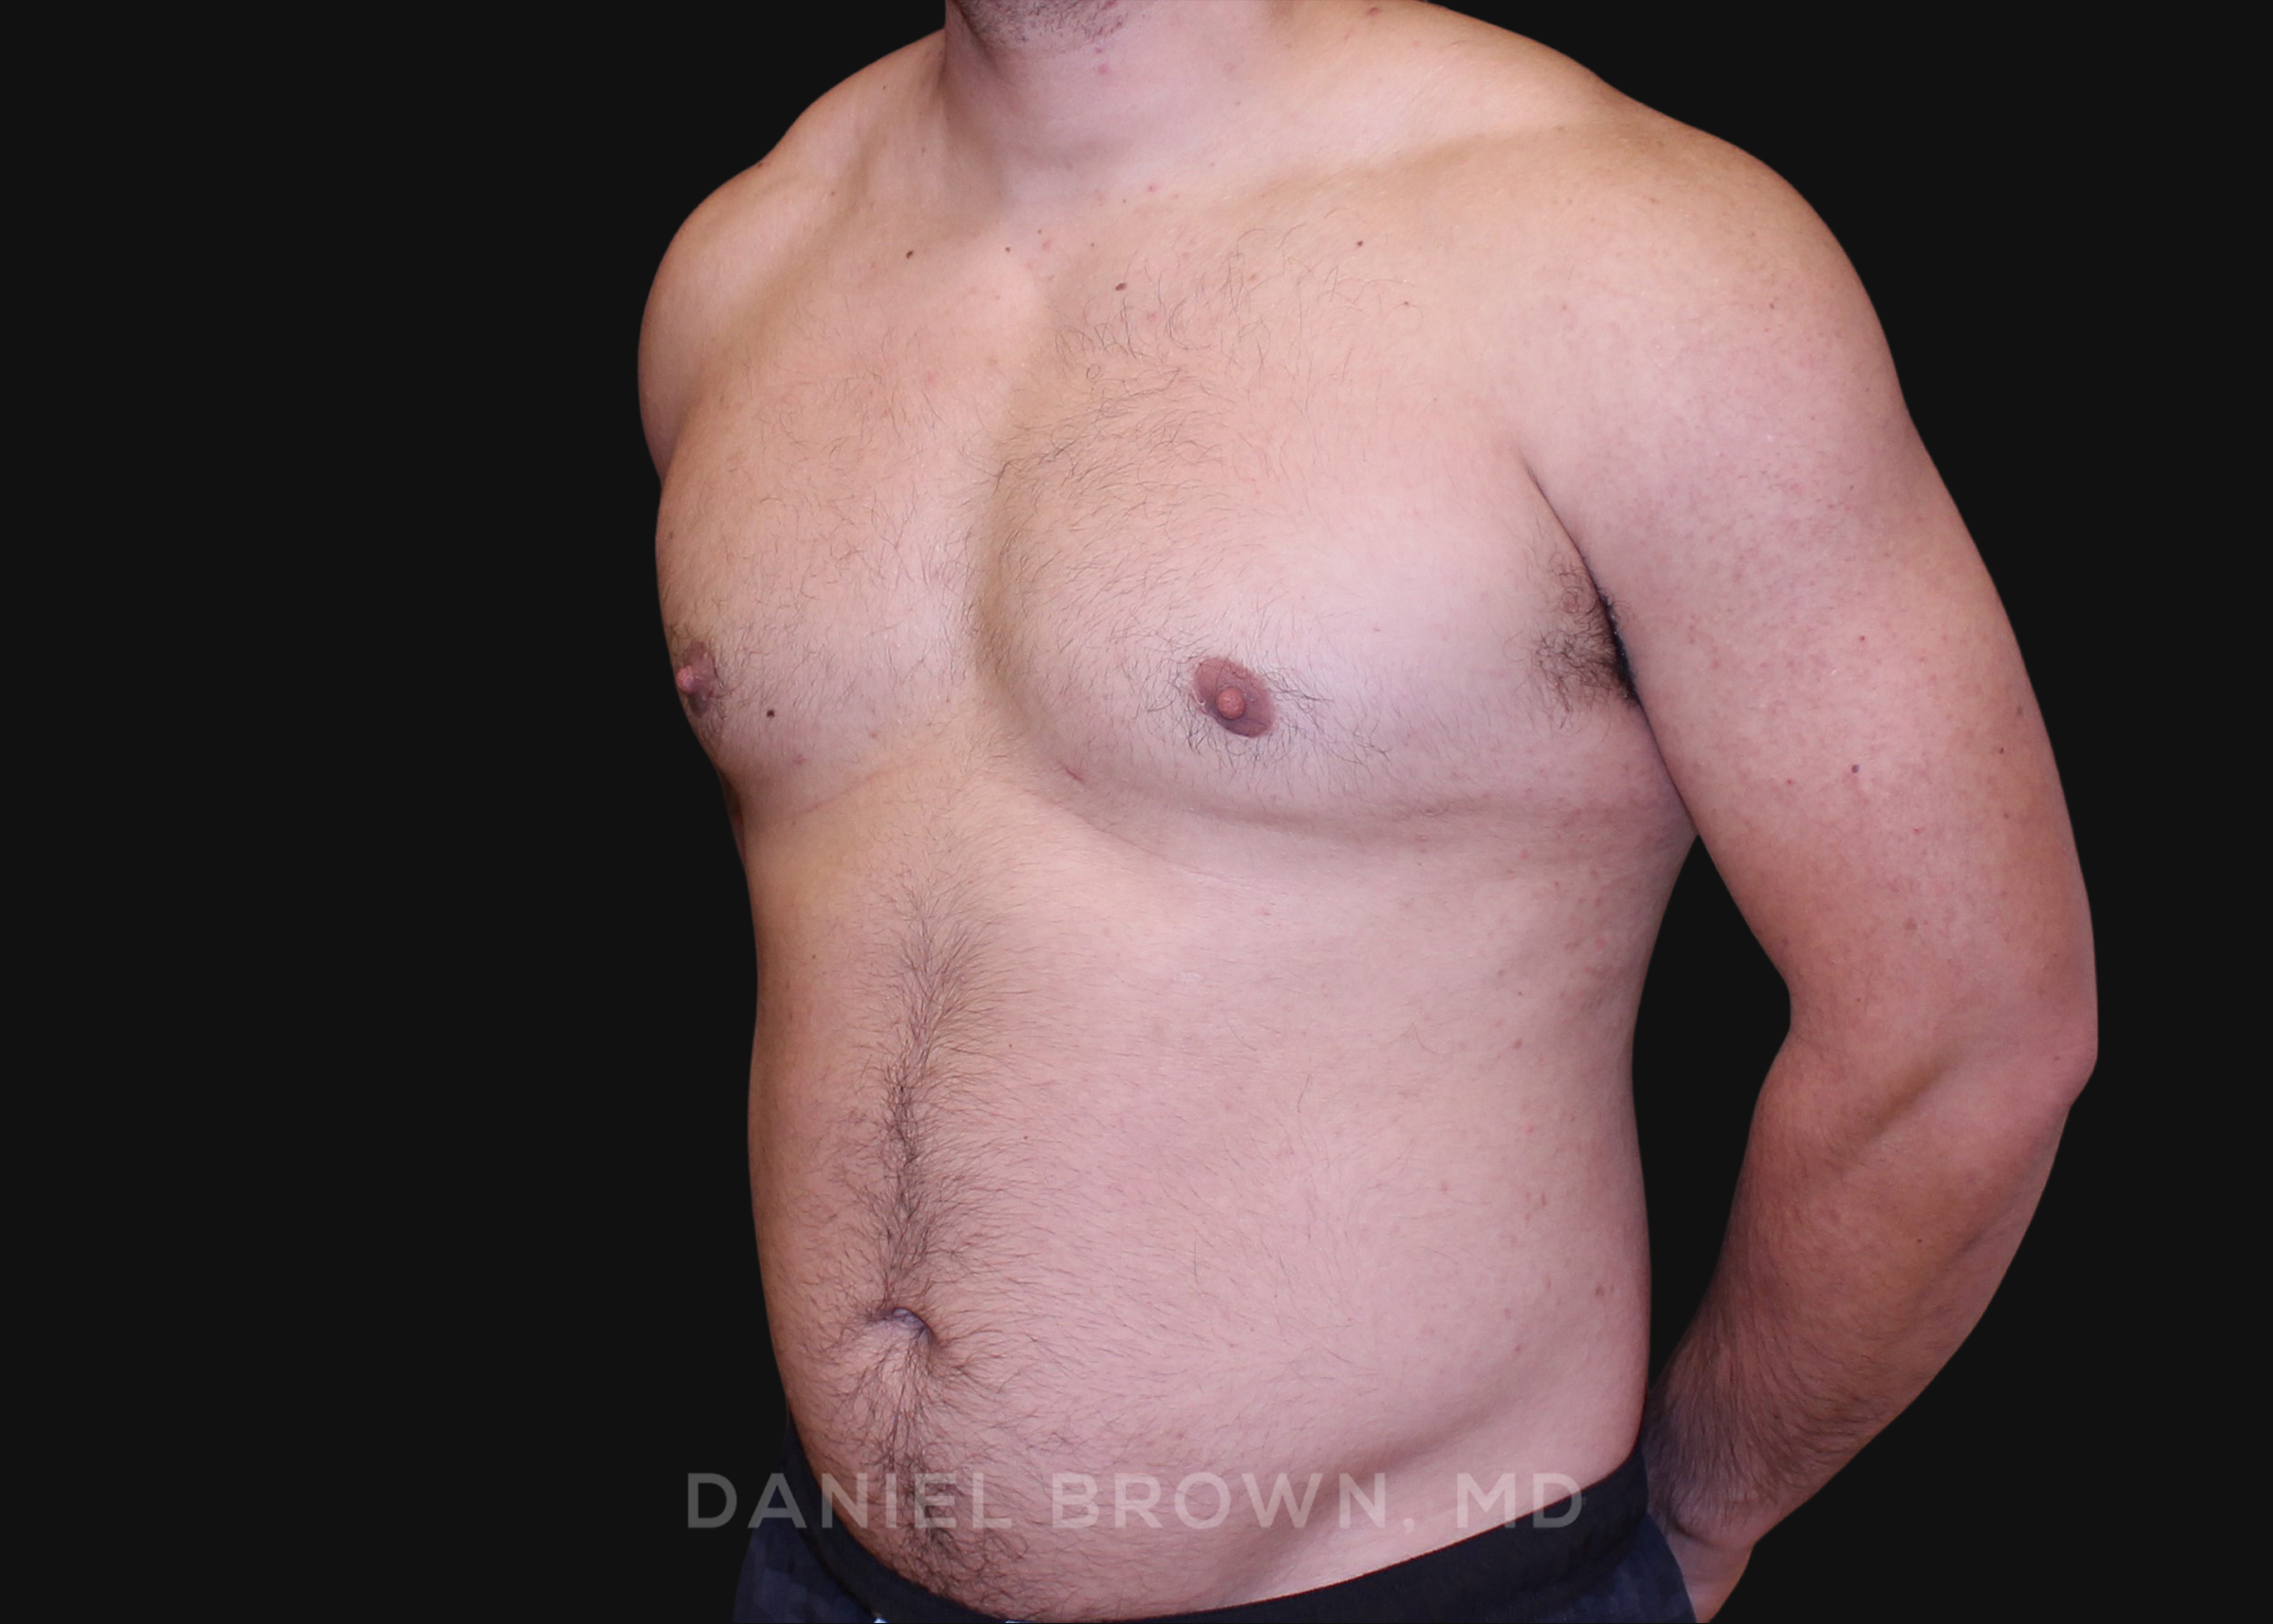 Male Breast Reduction Patient Photo - Case 2790 - after view